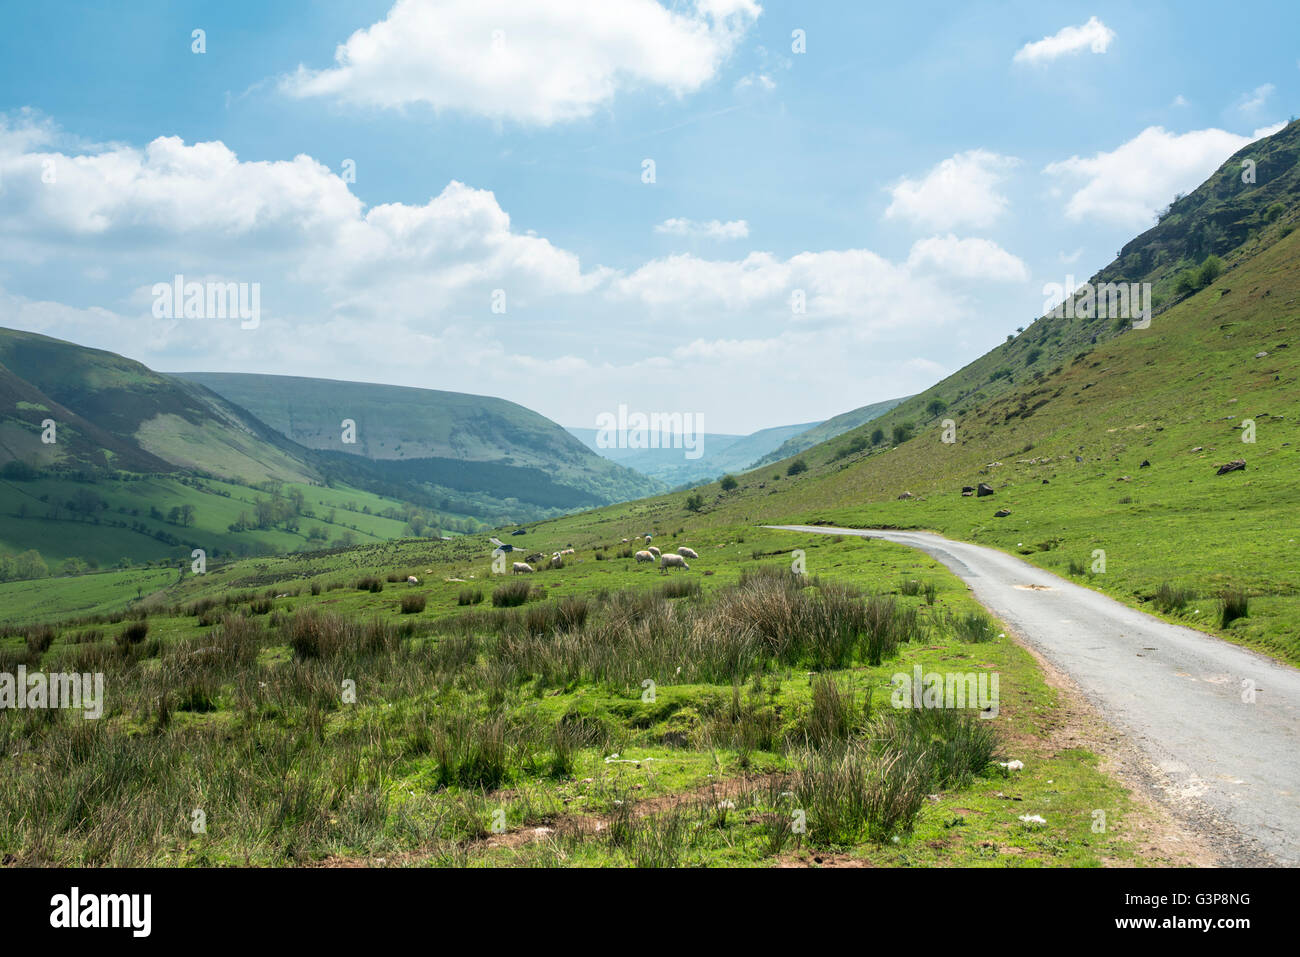 Sheep grazing next to a country road in a valley with steep sided mountains. Stock Photo